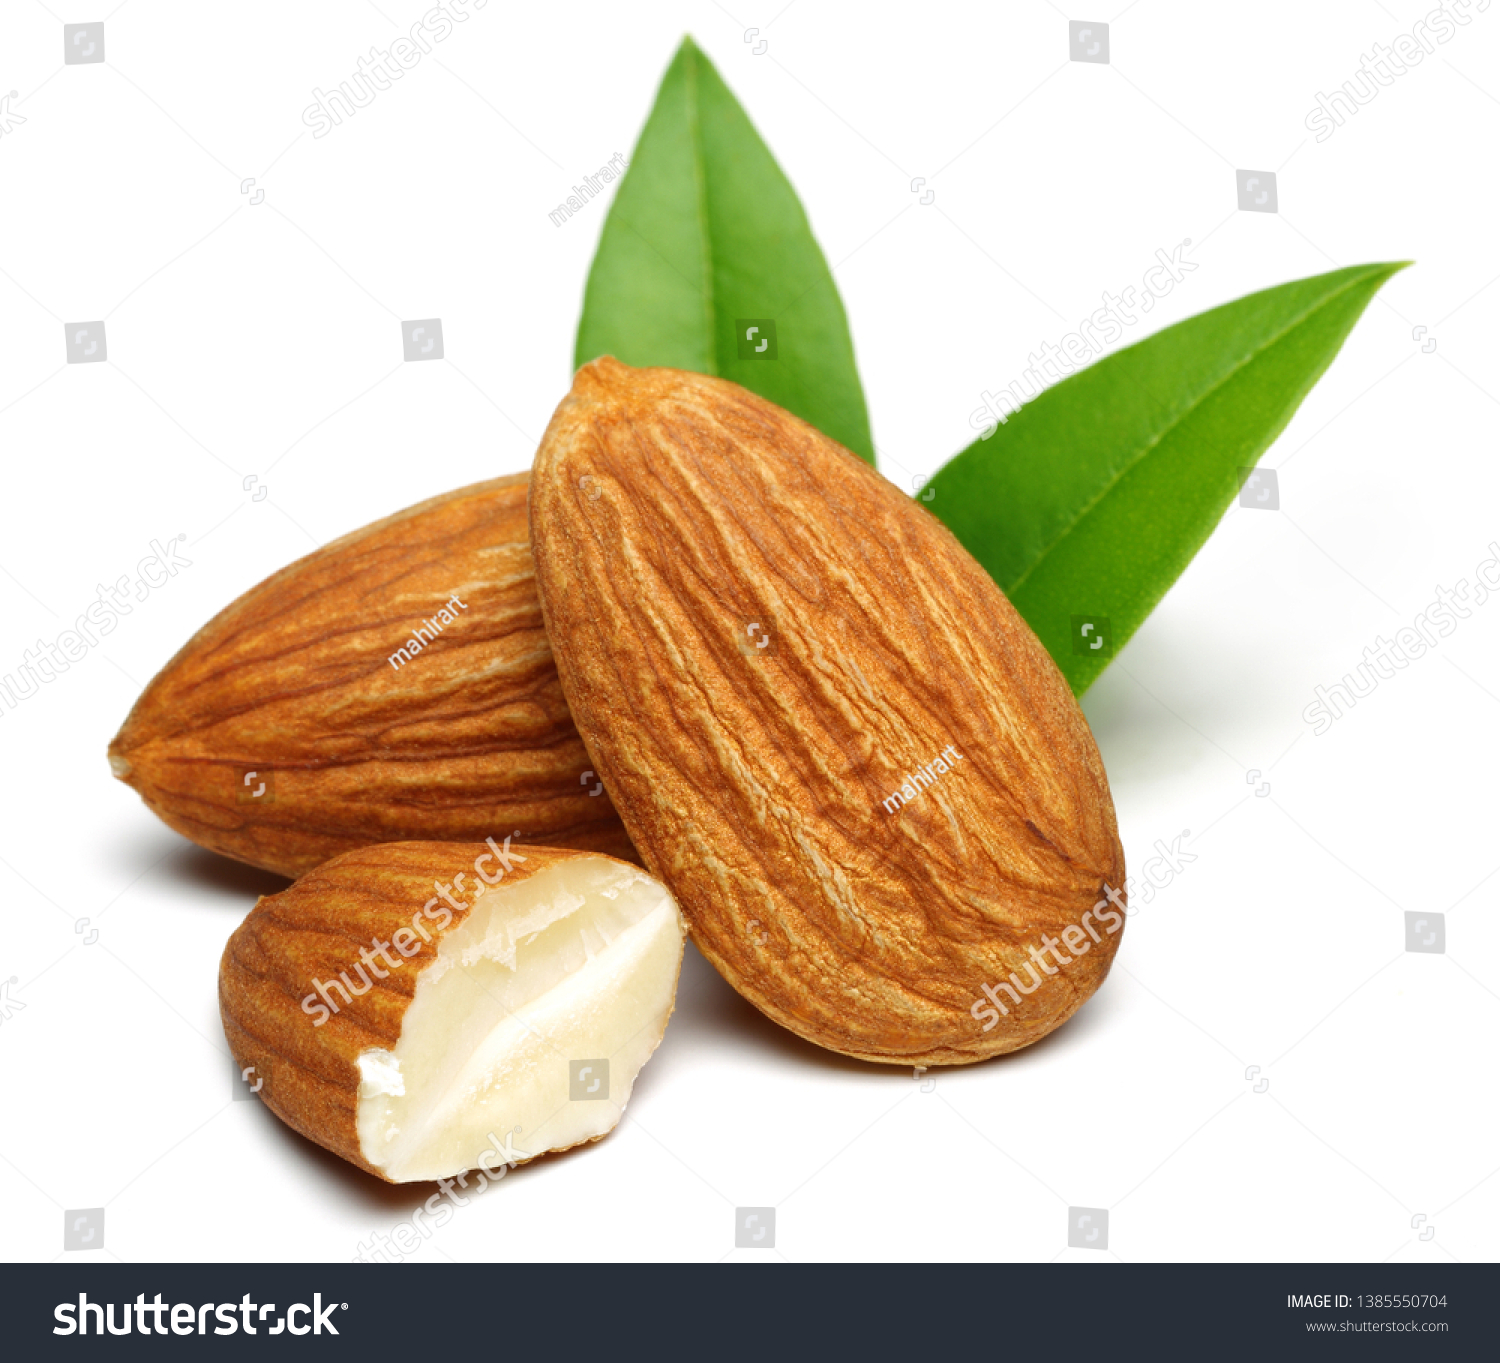 Group of almonds with leaves isolated on white background #1385550704